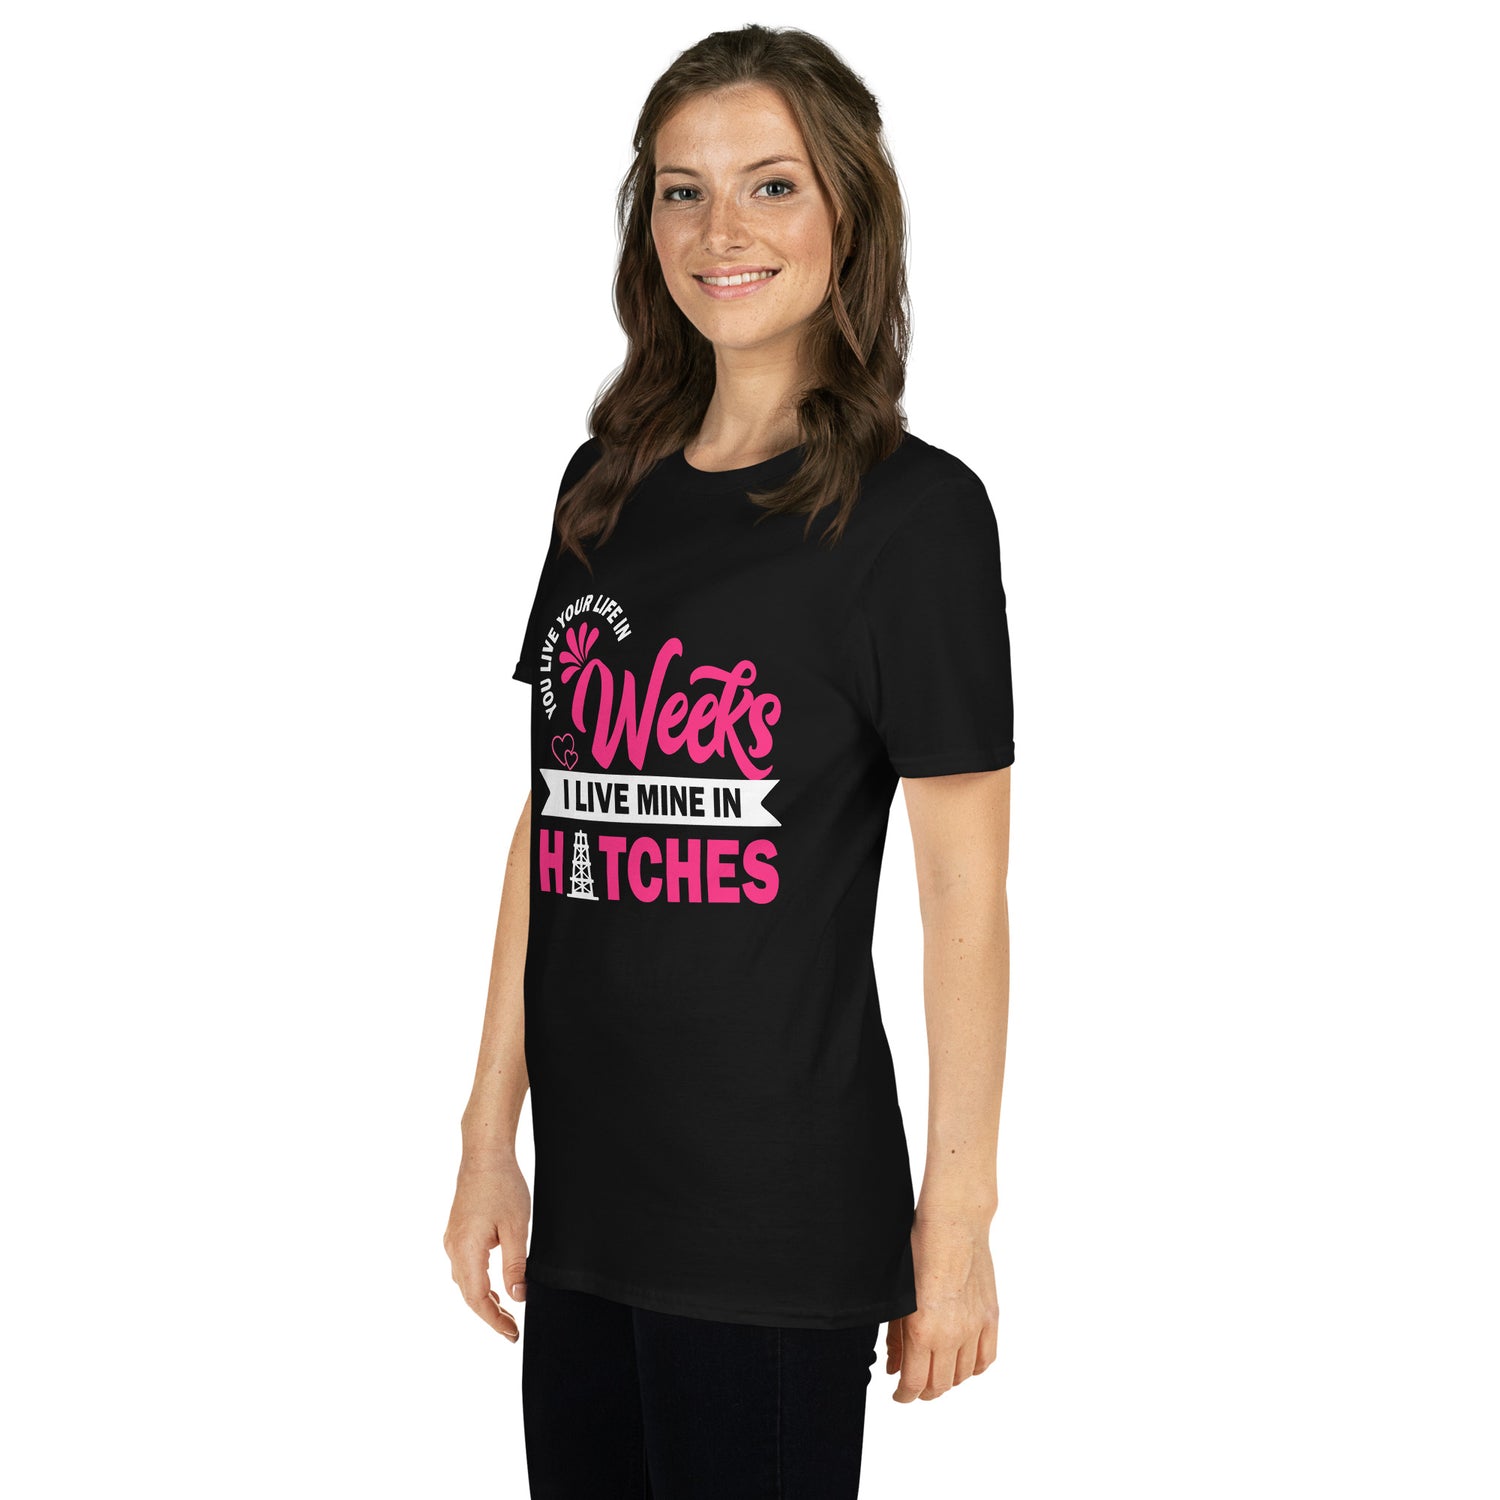 I Live Mine In Hitches - Women's T-Shirt